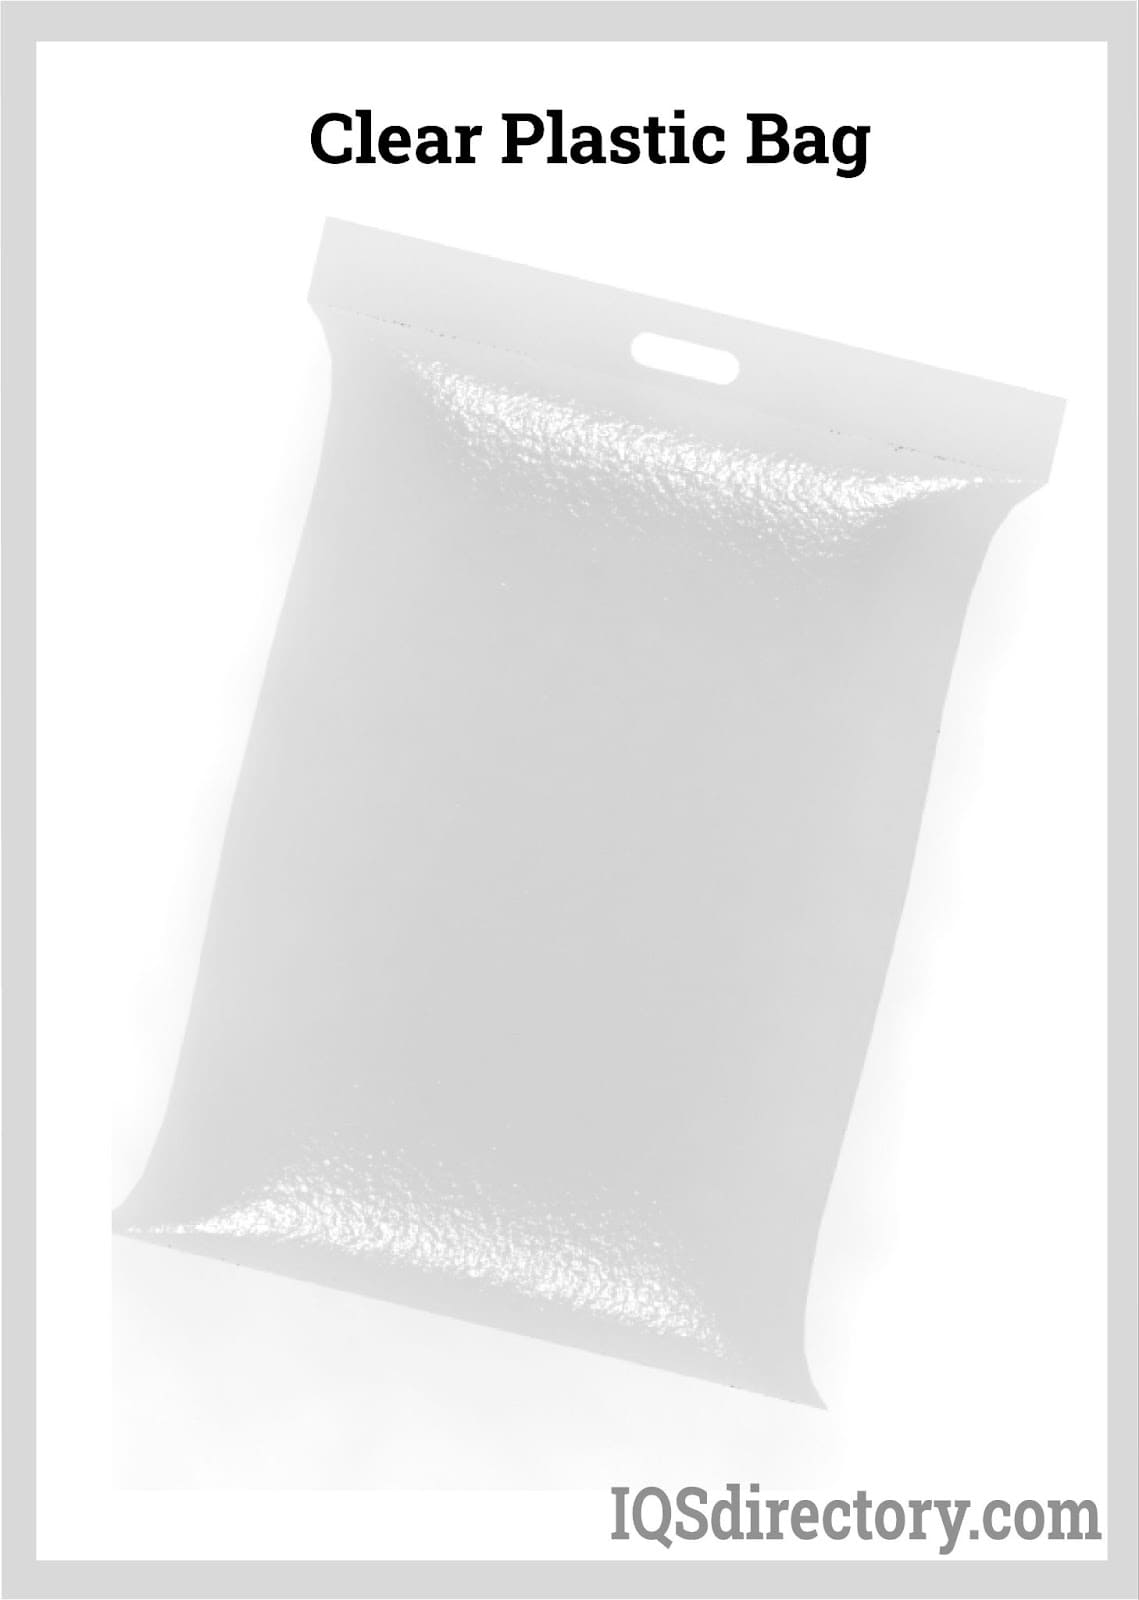 Empty Plastic Bag Clear Container Pouch Or Pack Stock Illustration   Download Image Now  Plastic Bag Transparent Bag  iStock